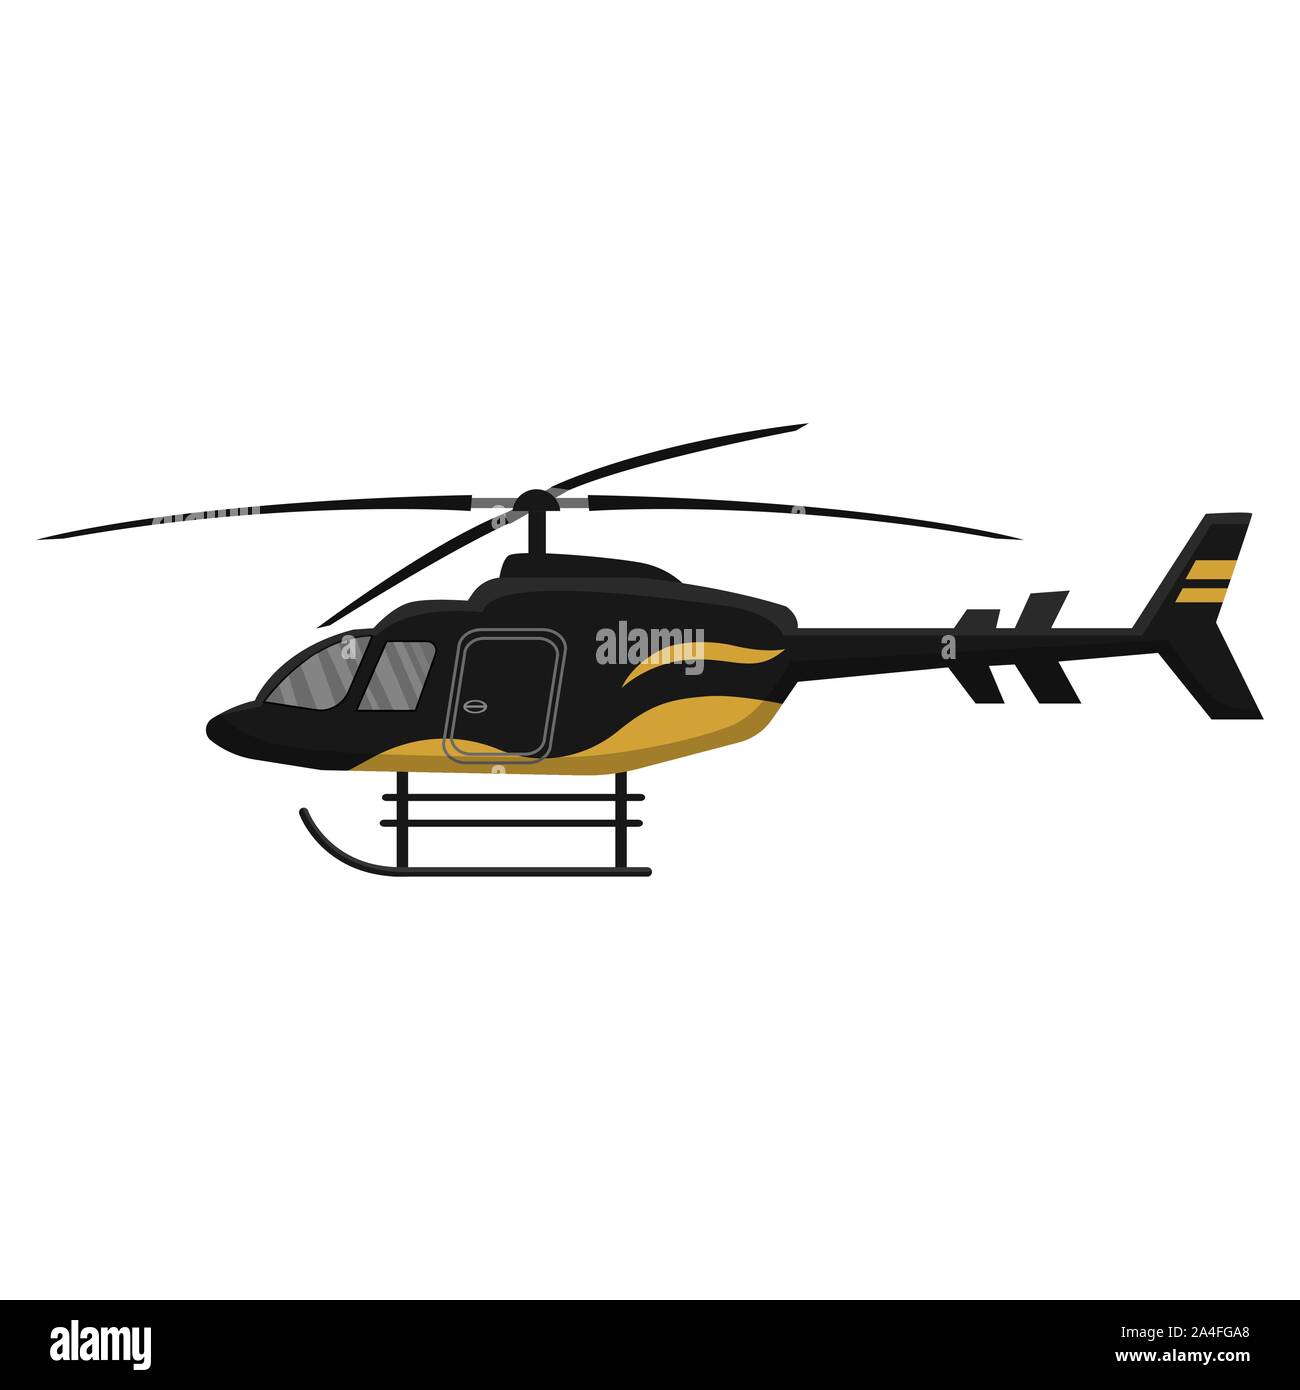 Multipurpose helicopter icon isolated on white background, air transport, aviation, vector illustration. Stock Vector